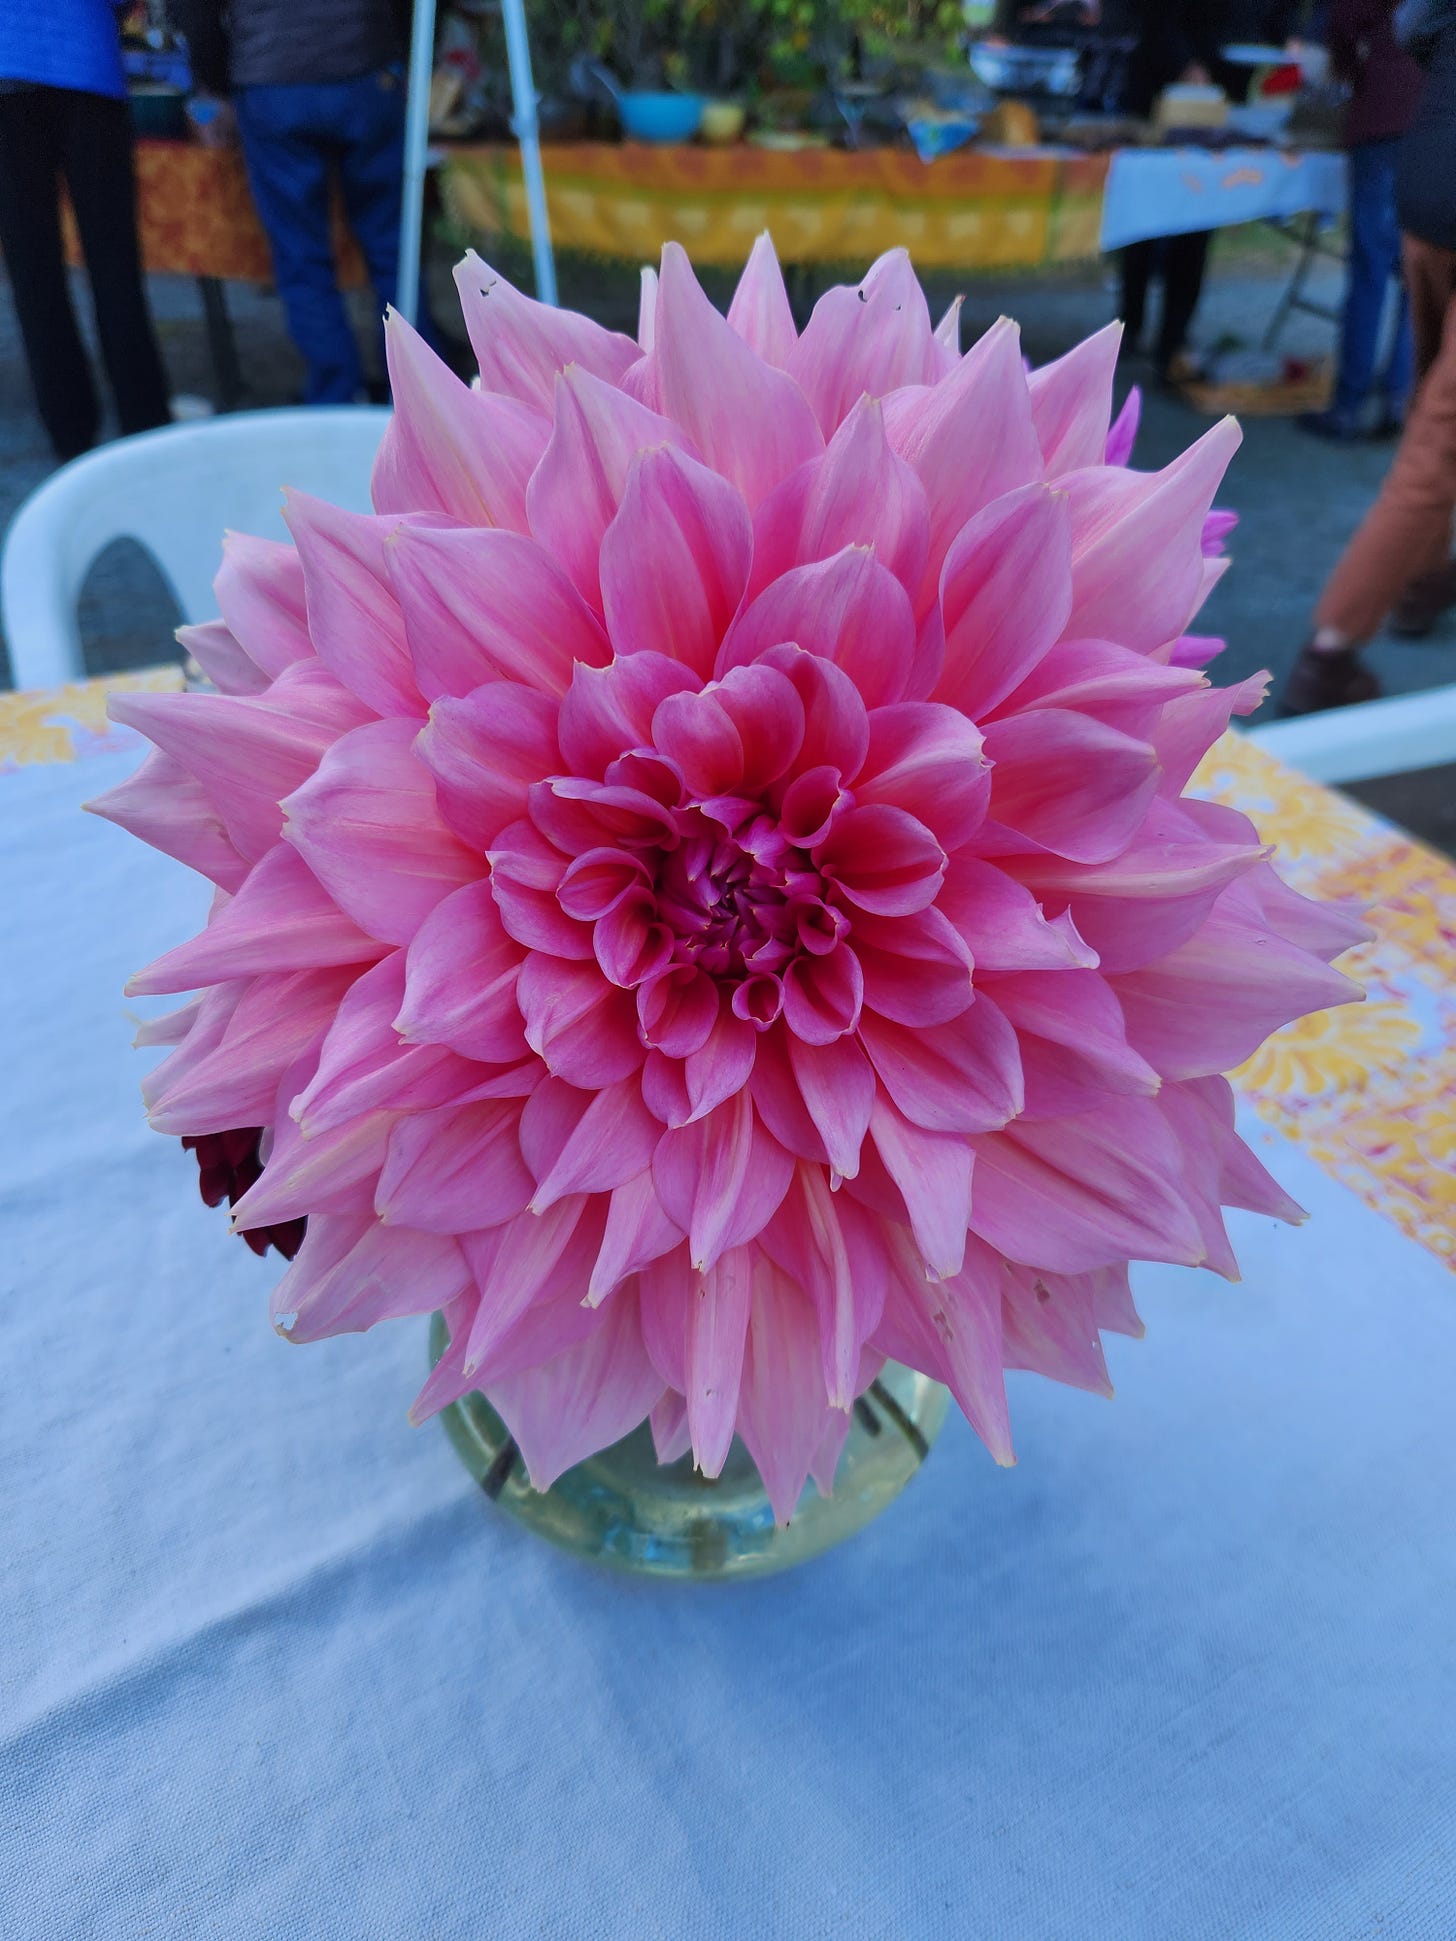 enormous pink dahlia in a vase on a table